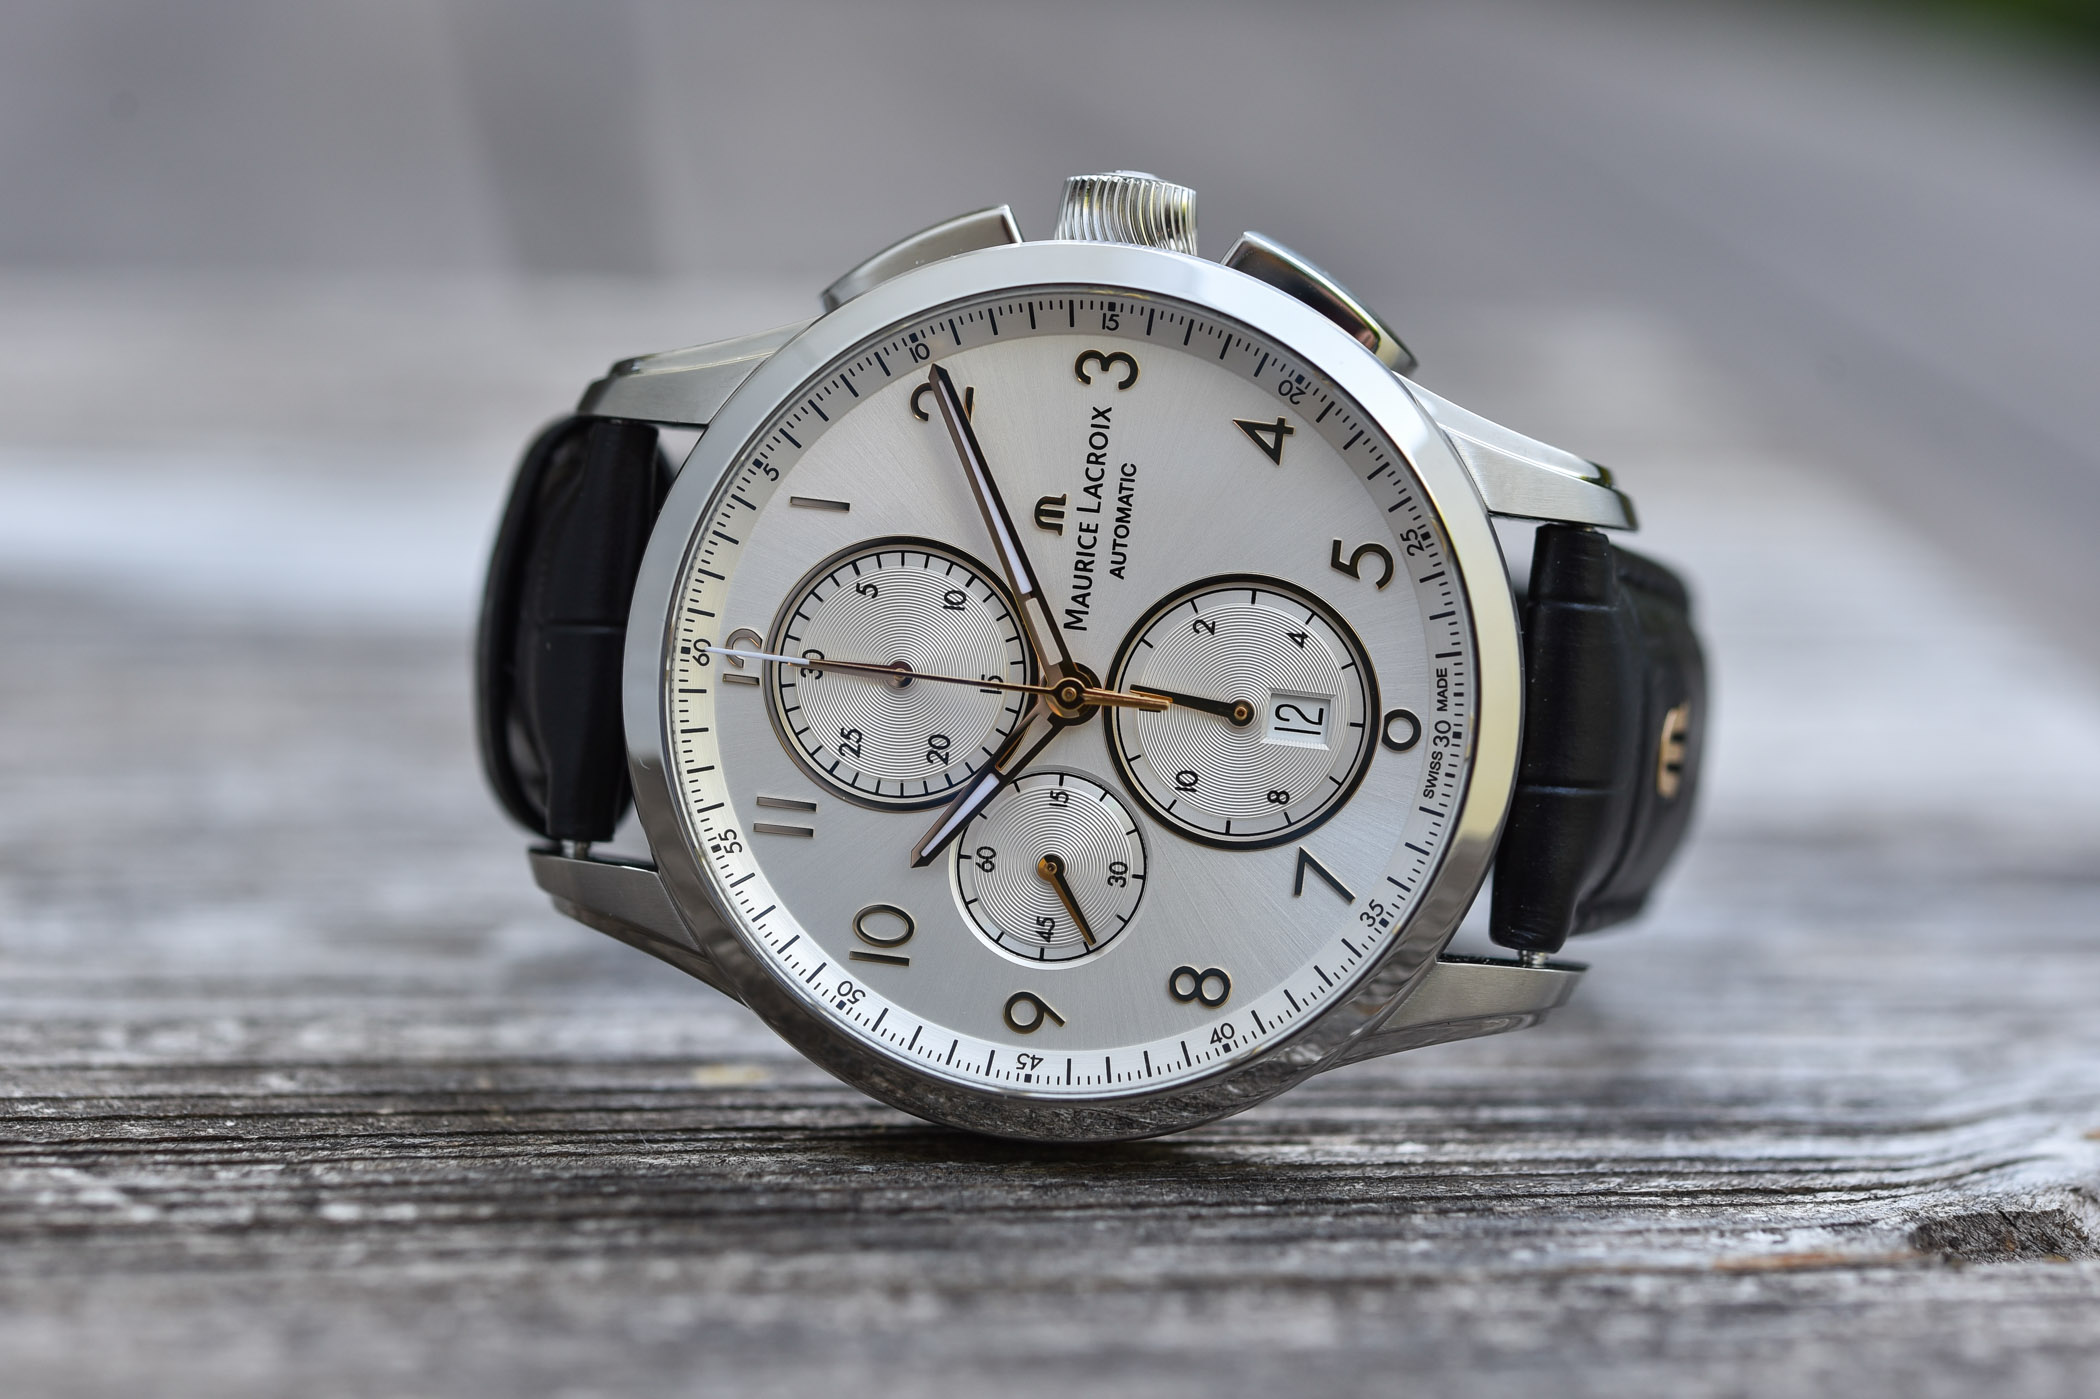 Introducing - 2020 Maurice Lacroix Pontos Chronograph (Hands-On)